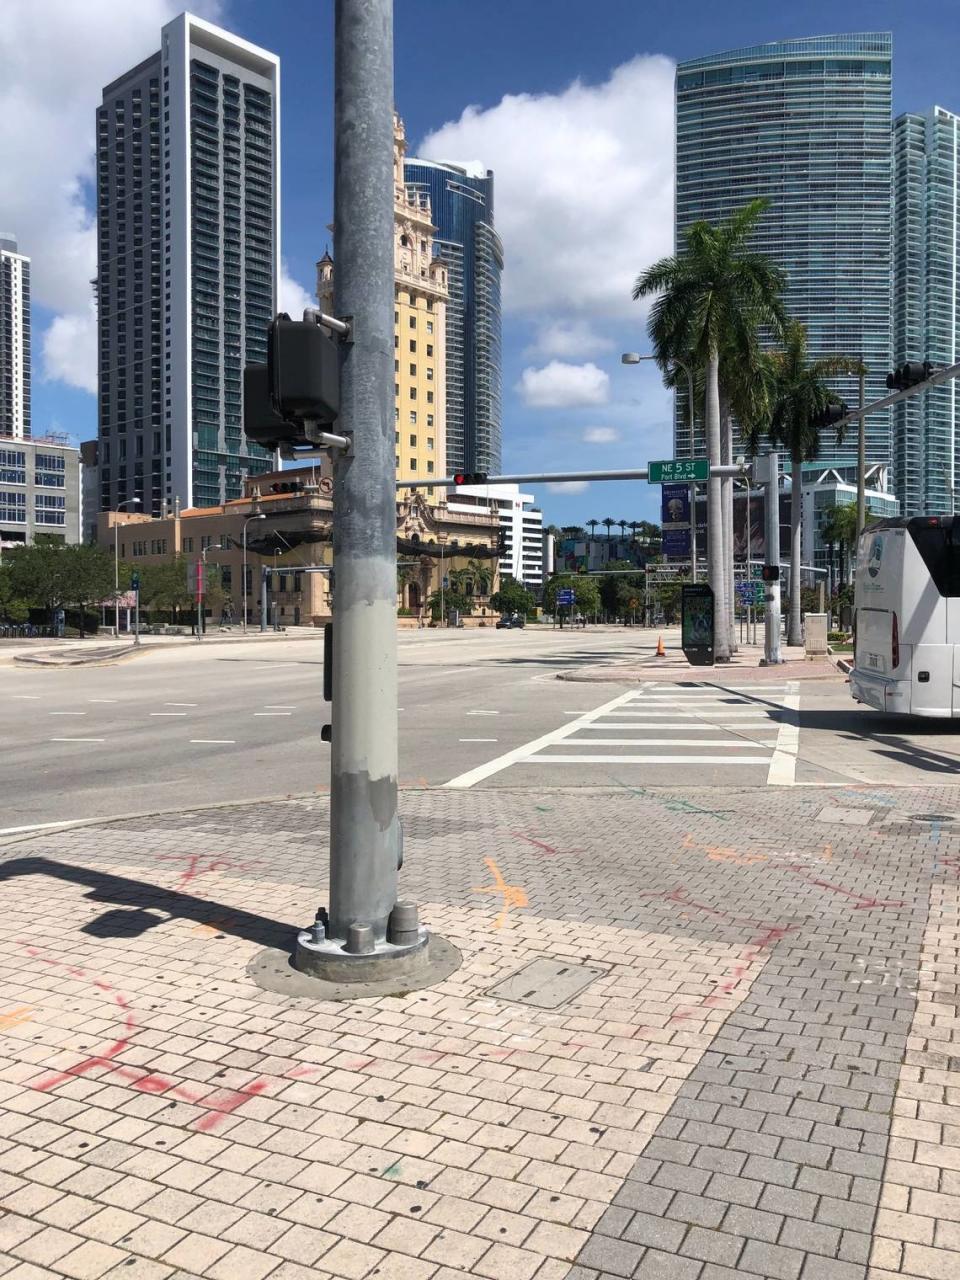 People may have actually heeded the Trump traffic warnings and tuned into local news. The normally clogged stretch of Biscayne Boulevard on Northeast Fifth Street, leading into the Port of Miami in front of Bayside Marketplace, resembled a ghost town around 11 a.m. Tuesday.